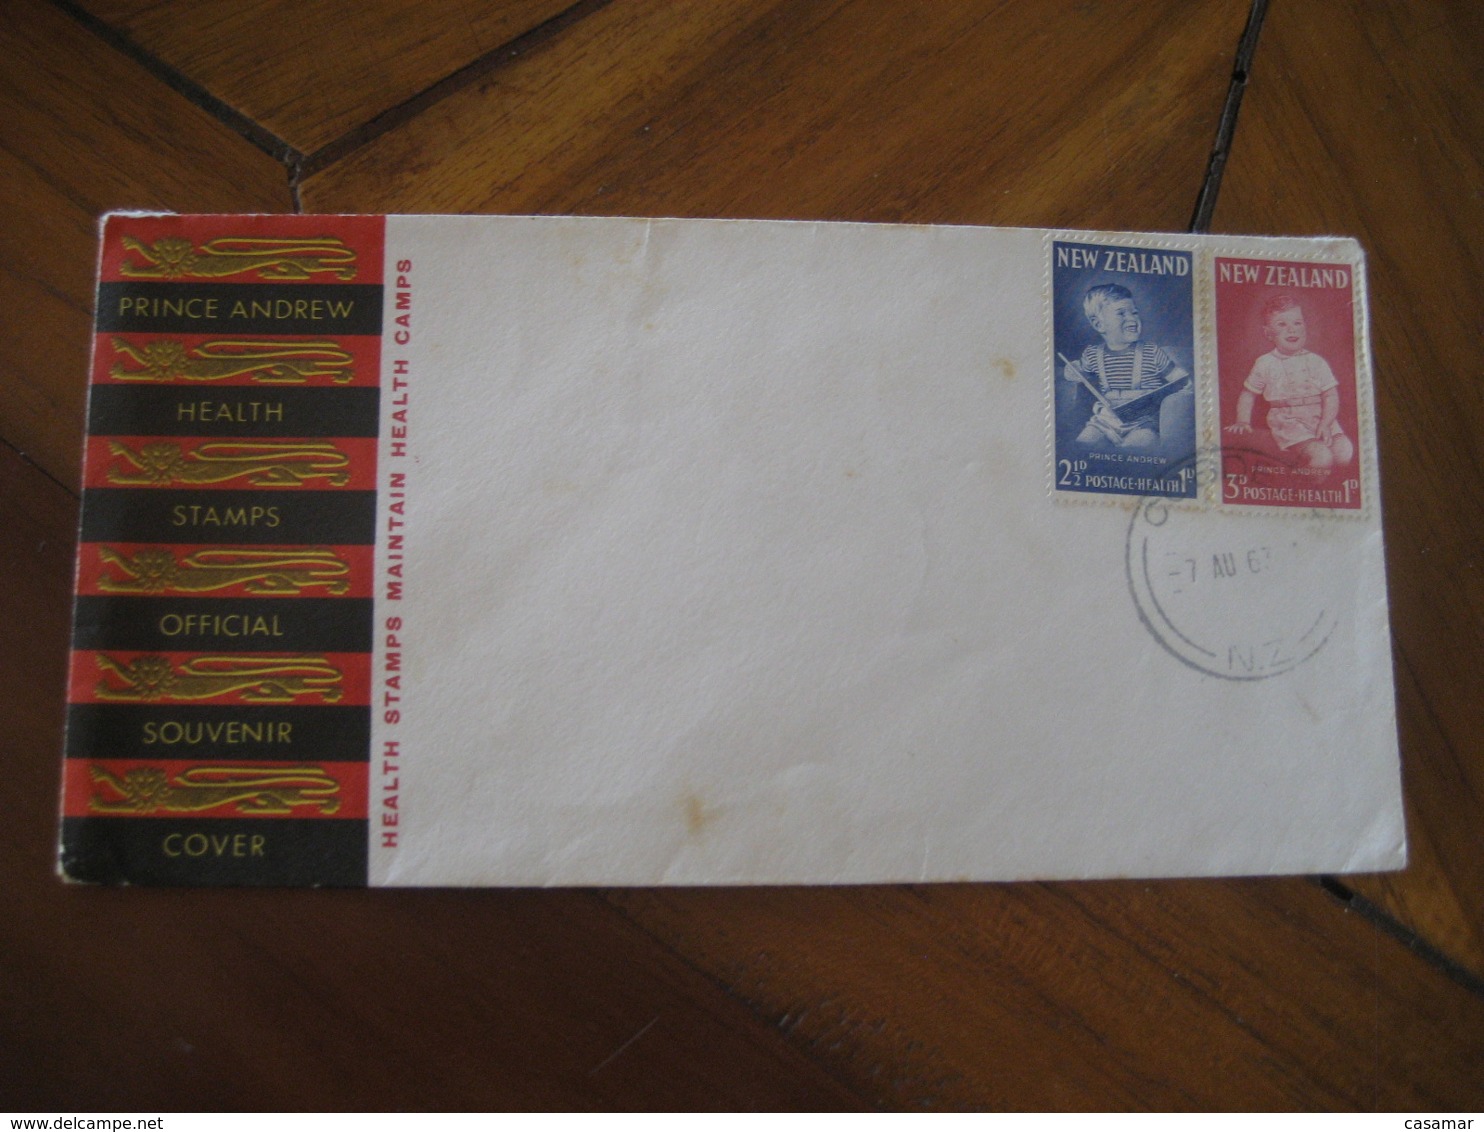 Prince Andrew 1963 Health Stamps Official Souvenir Cancel Cover NEW ZEALAND - Covers & Documents